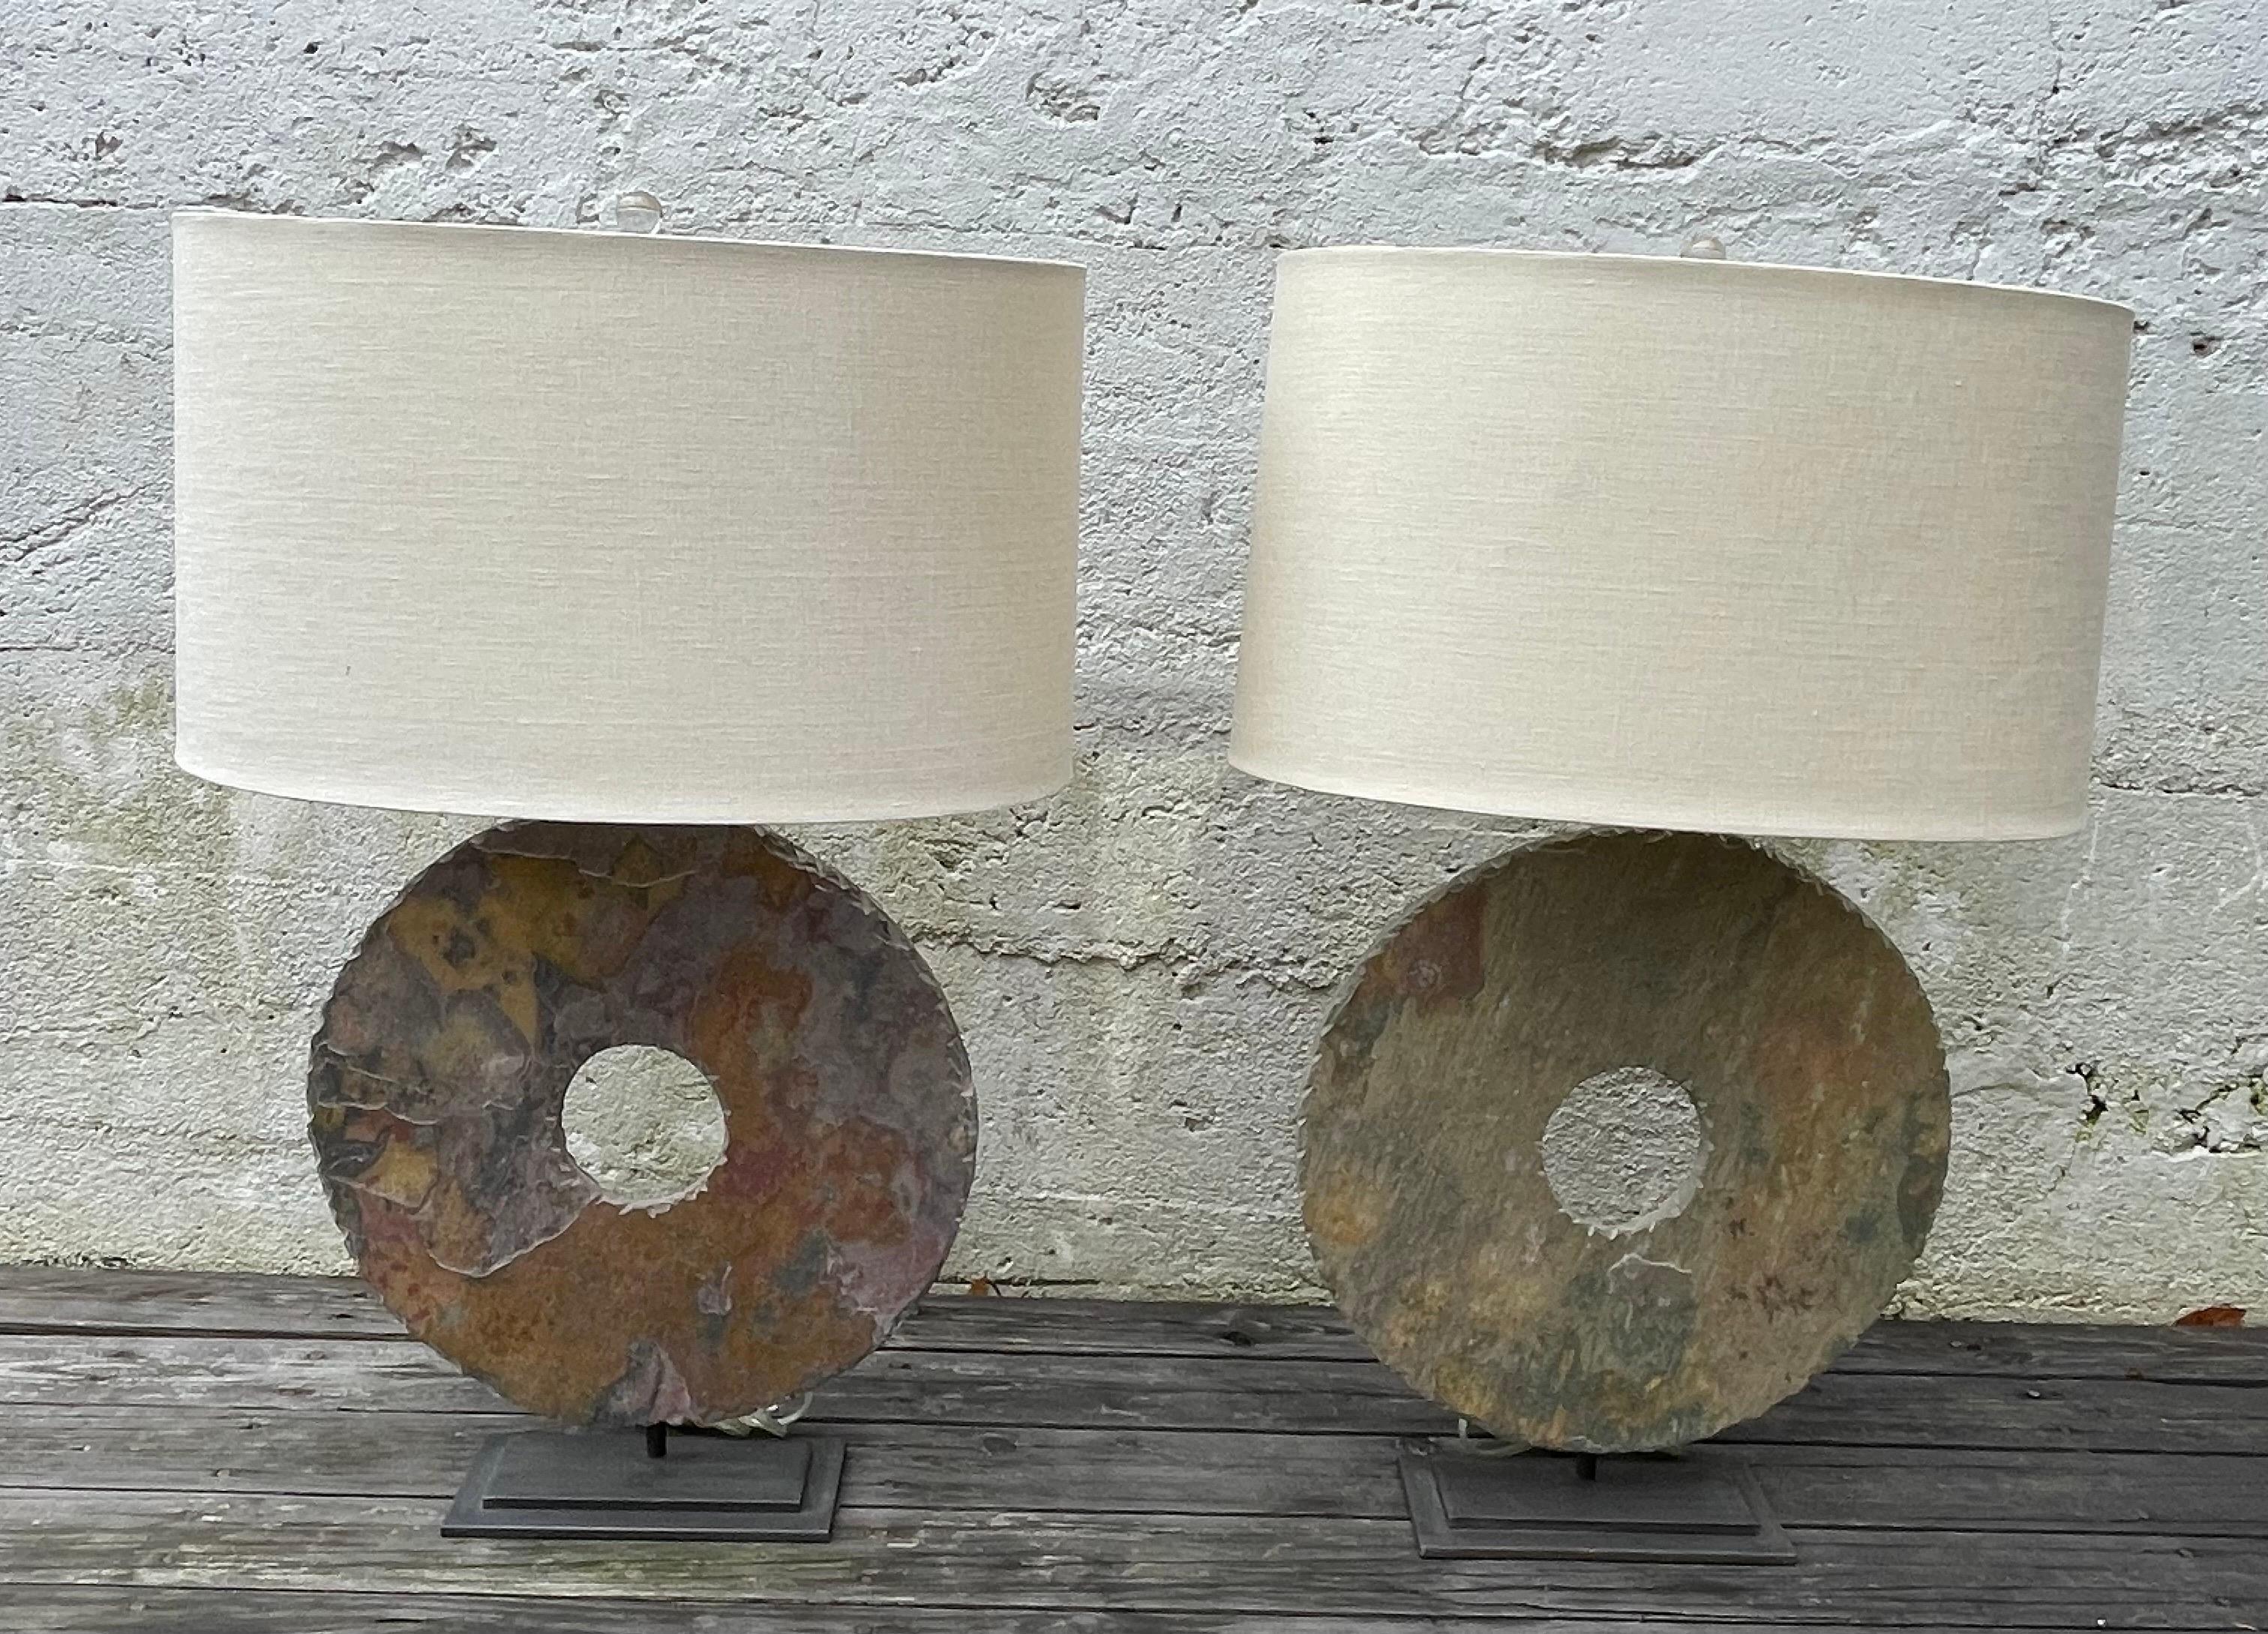 Pair of Contemporary modern table lamps, hand-carved slate mounted on iron metal stands, linen white oval shades included.
